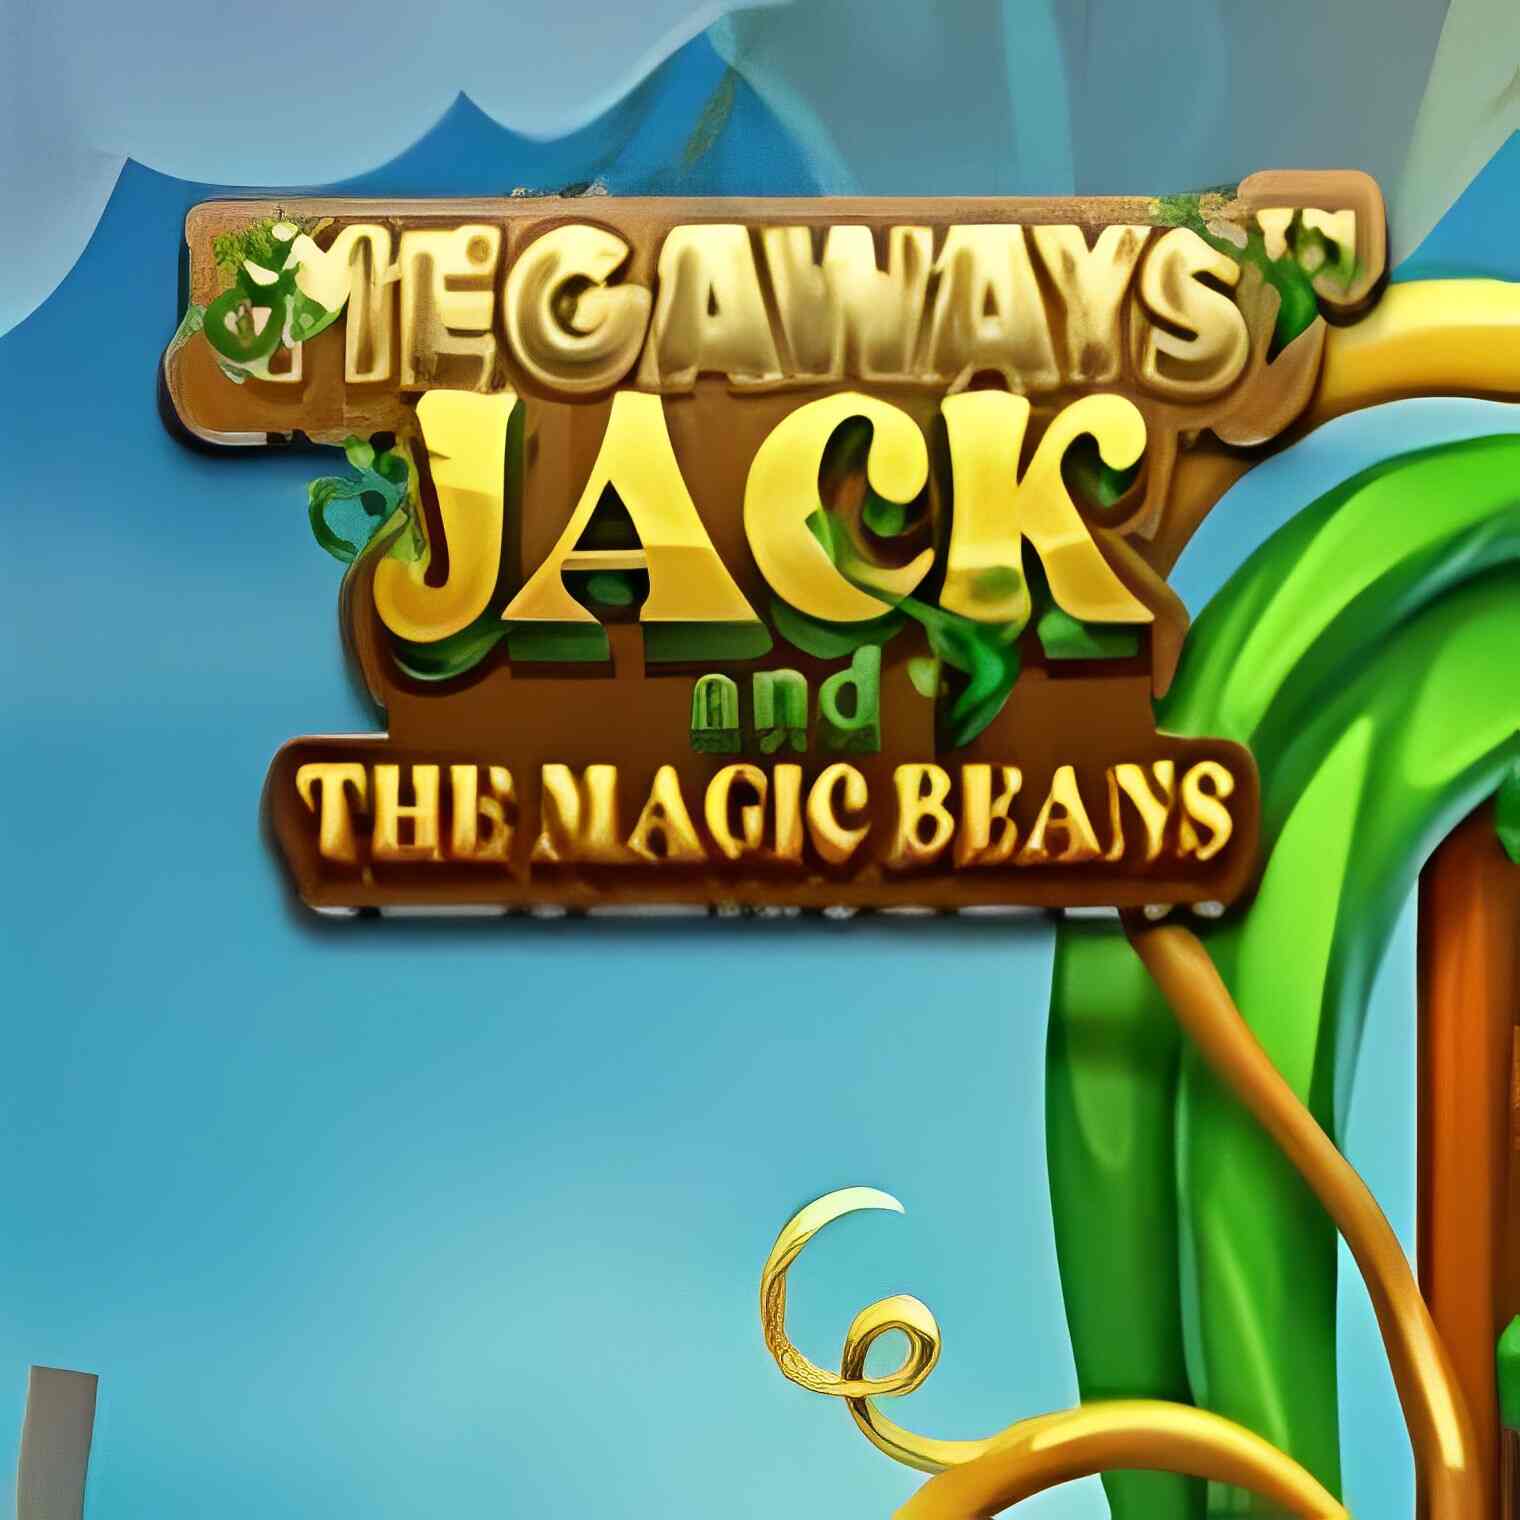 Megaways Jack and The Magic Beans Pokie Review